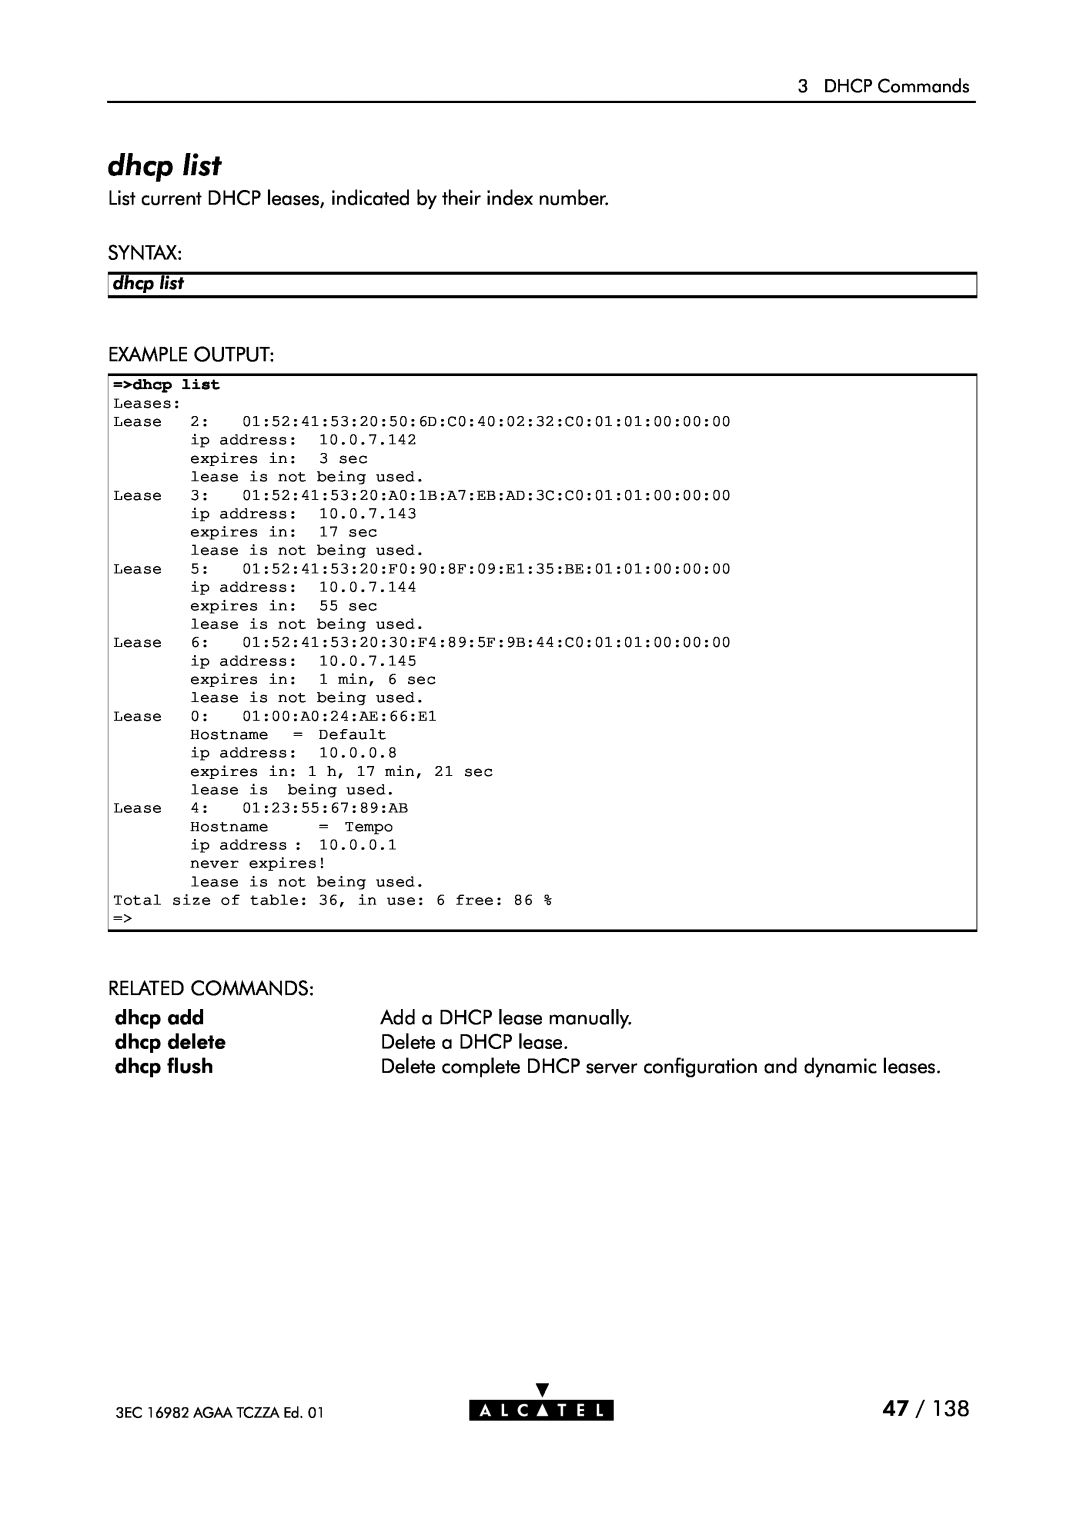 Alcatel Carrier Internetworking Solutions 350I dhcp list, List current DHCP leases, indicated by their index number SYNTAX 